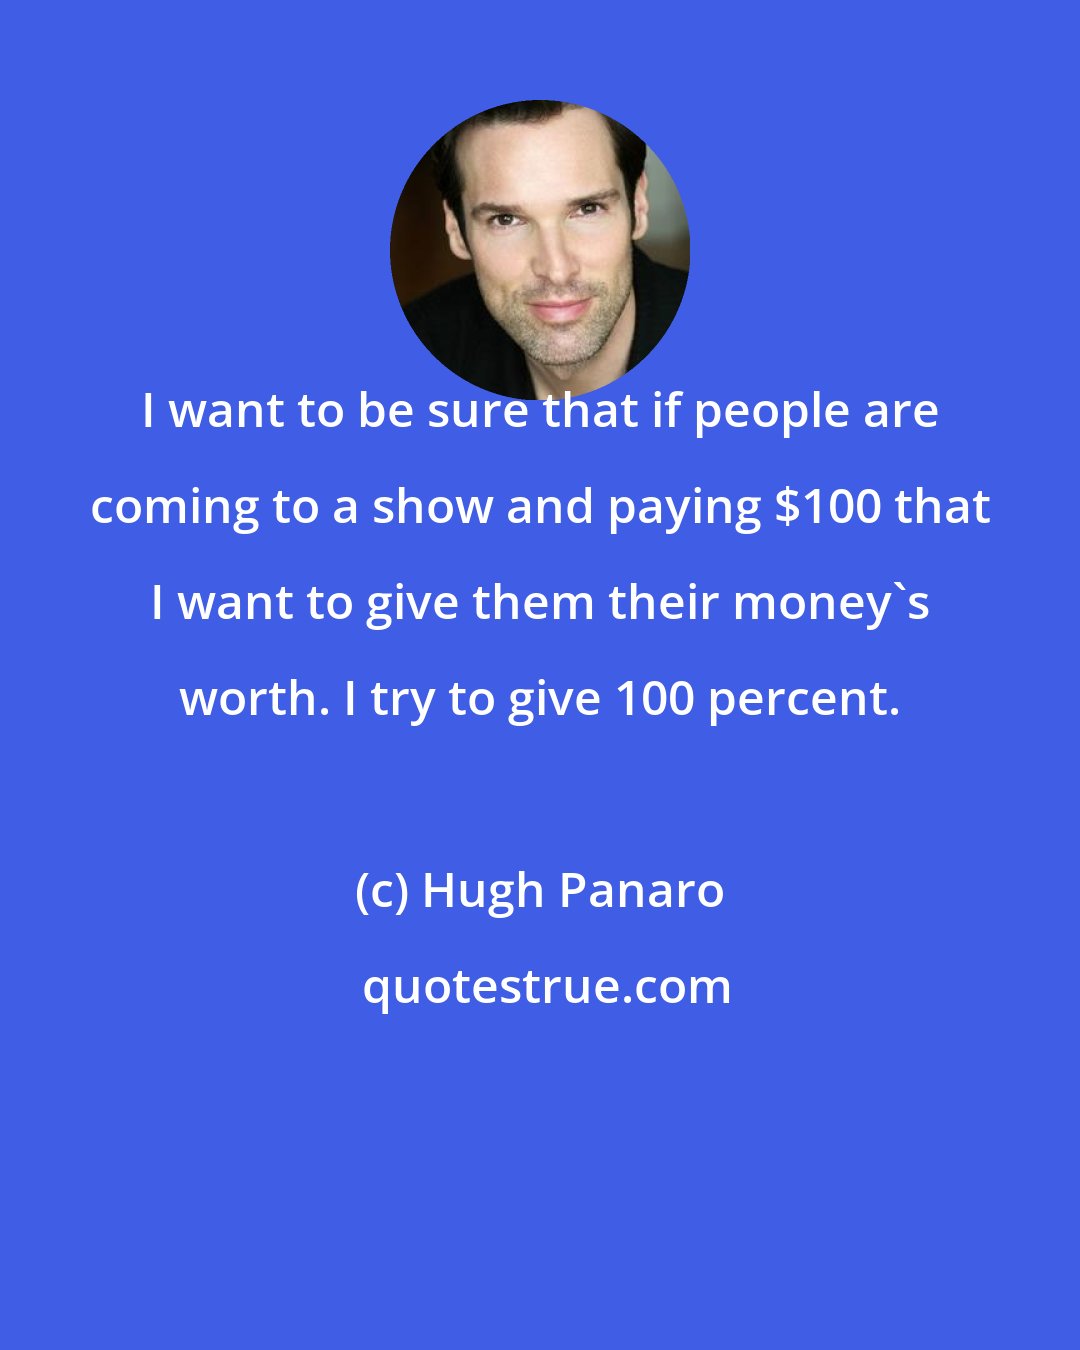 Hugh Panaro: I want to be sure that if people are coming to a show and paying $100 that I want to give them their money's worth. I try to give 100 percent.